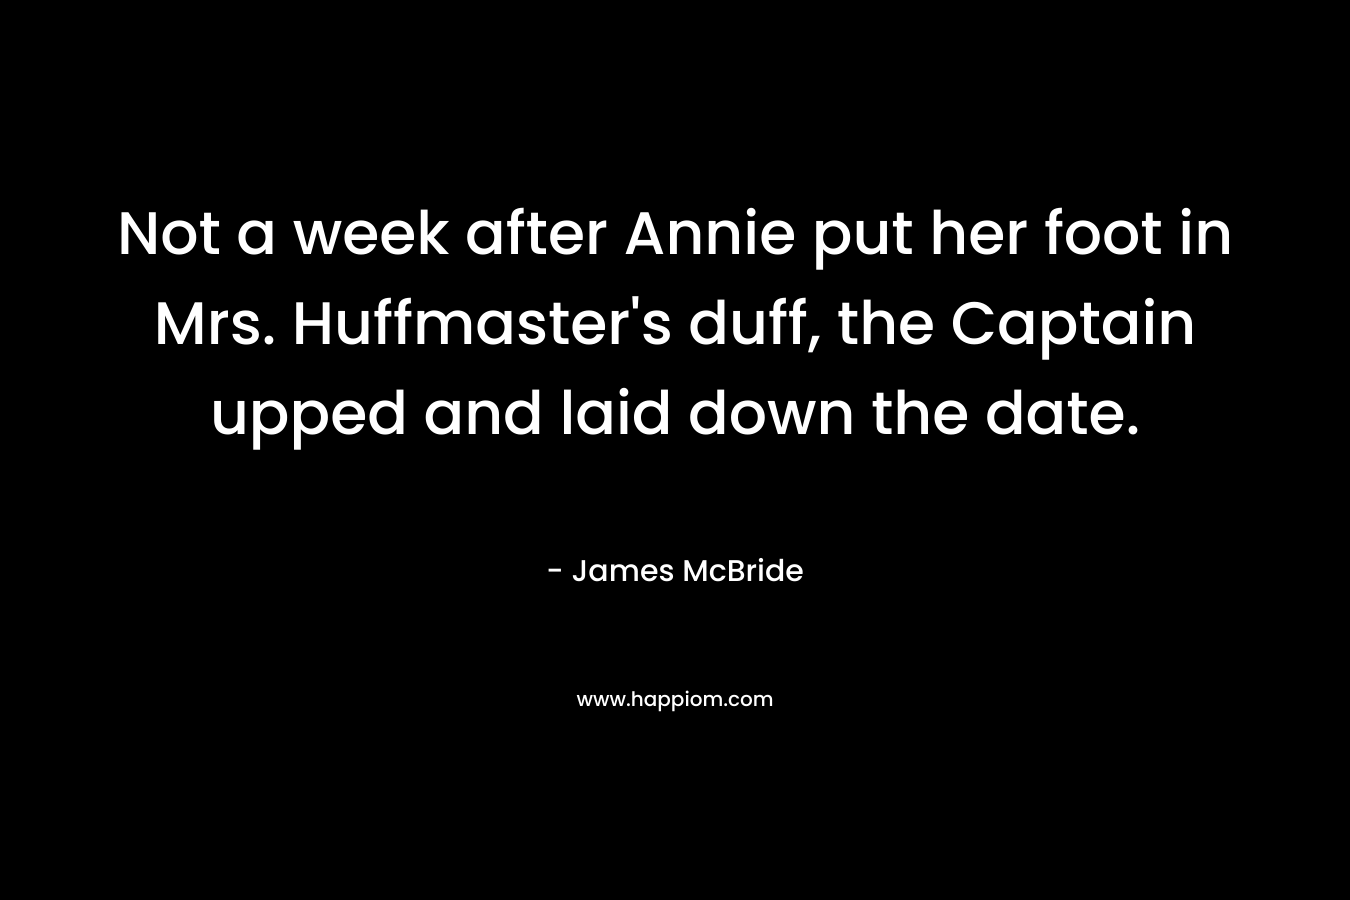 Not a week after Annie put her foot in Mrs. Huffmaster’s duff, the Captain upped and laid down the date. – James McBride